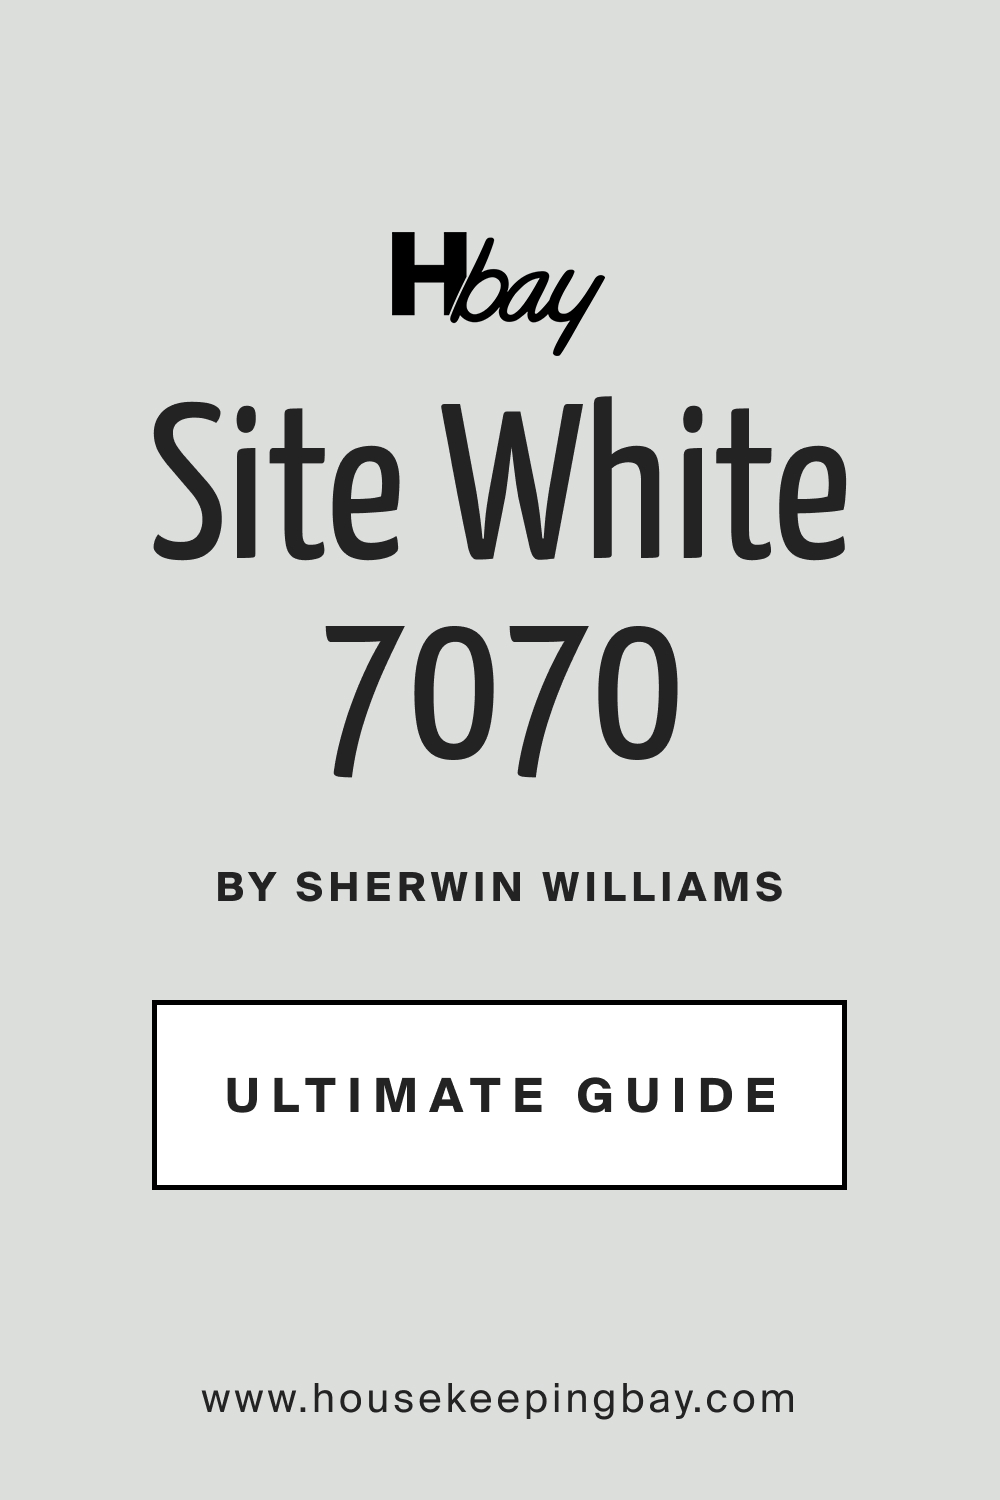 SW 7070 Site White by Sherwin Williams Ultimate Guide